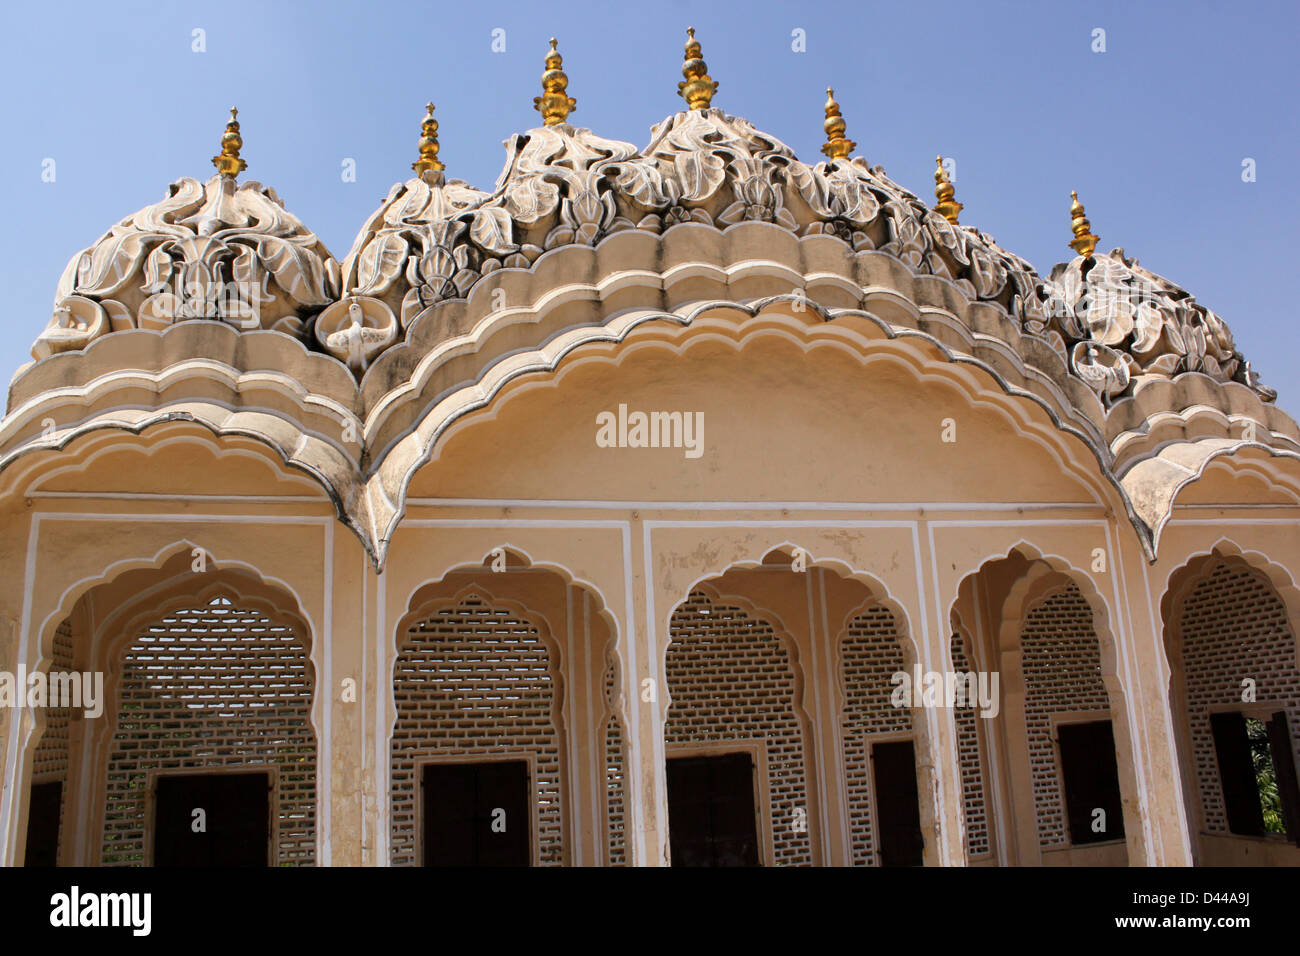 Domed canopies, fluted pillars, lotus and floral patterns of Hawa mahal or  palace of winds Jaipur Rajasthan India Stock Photo - Alamy